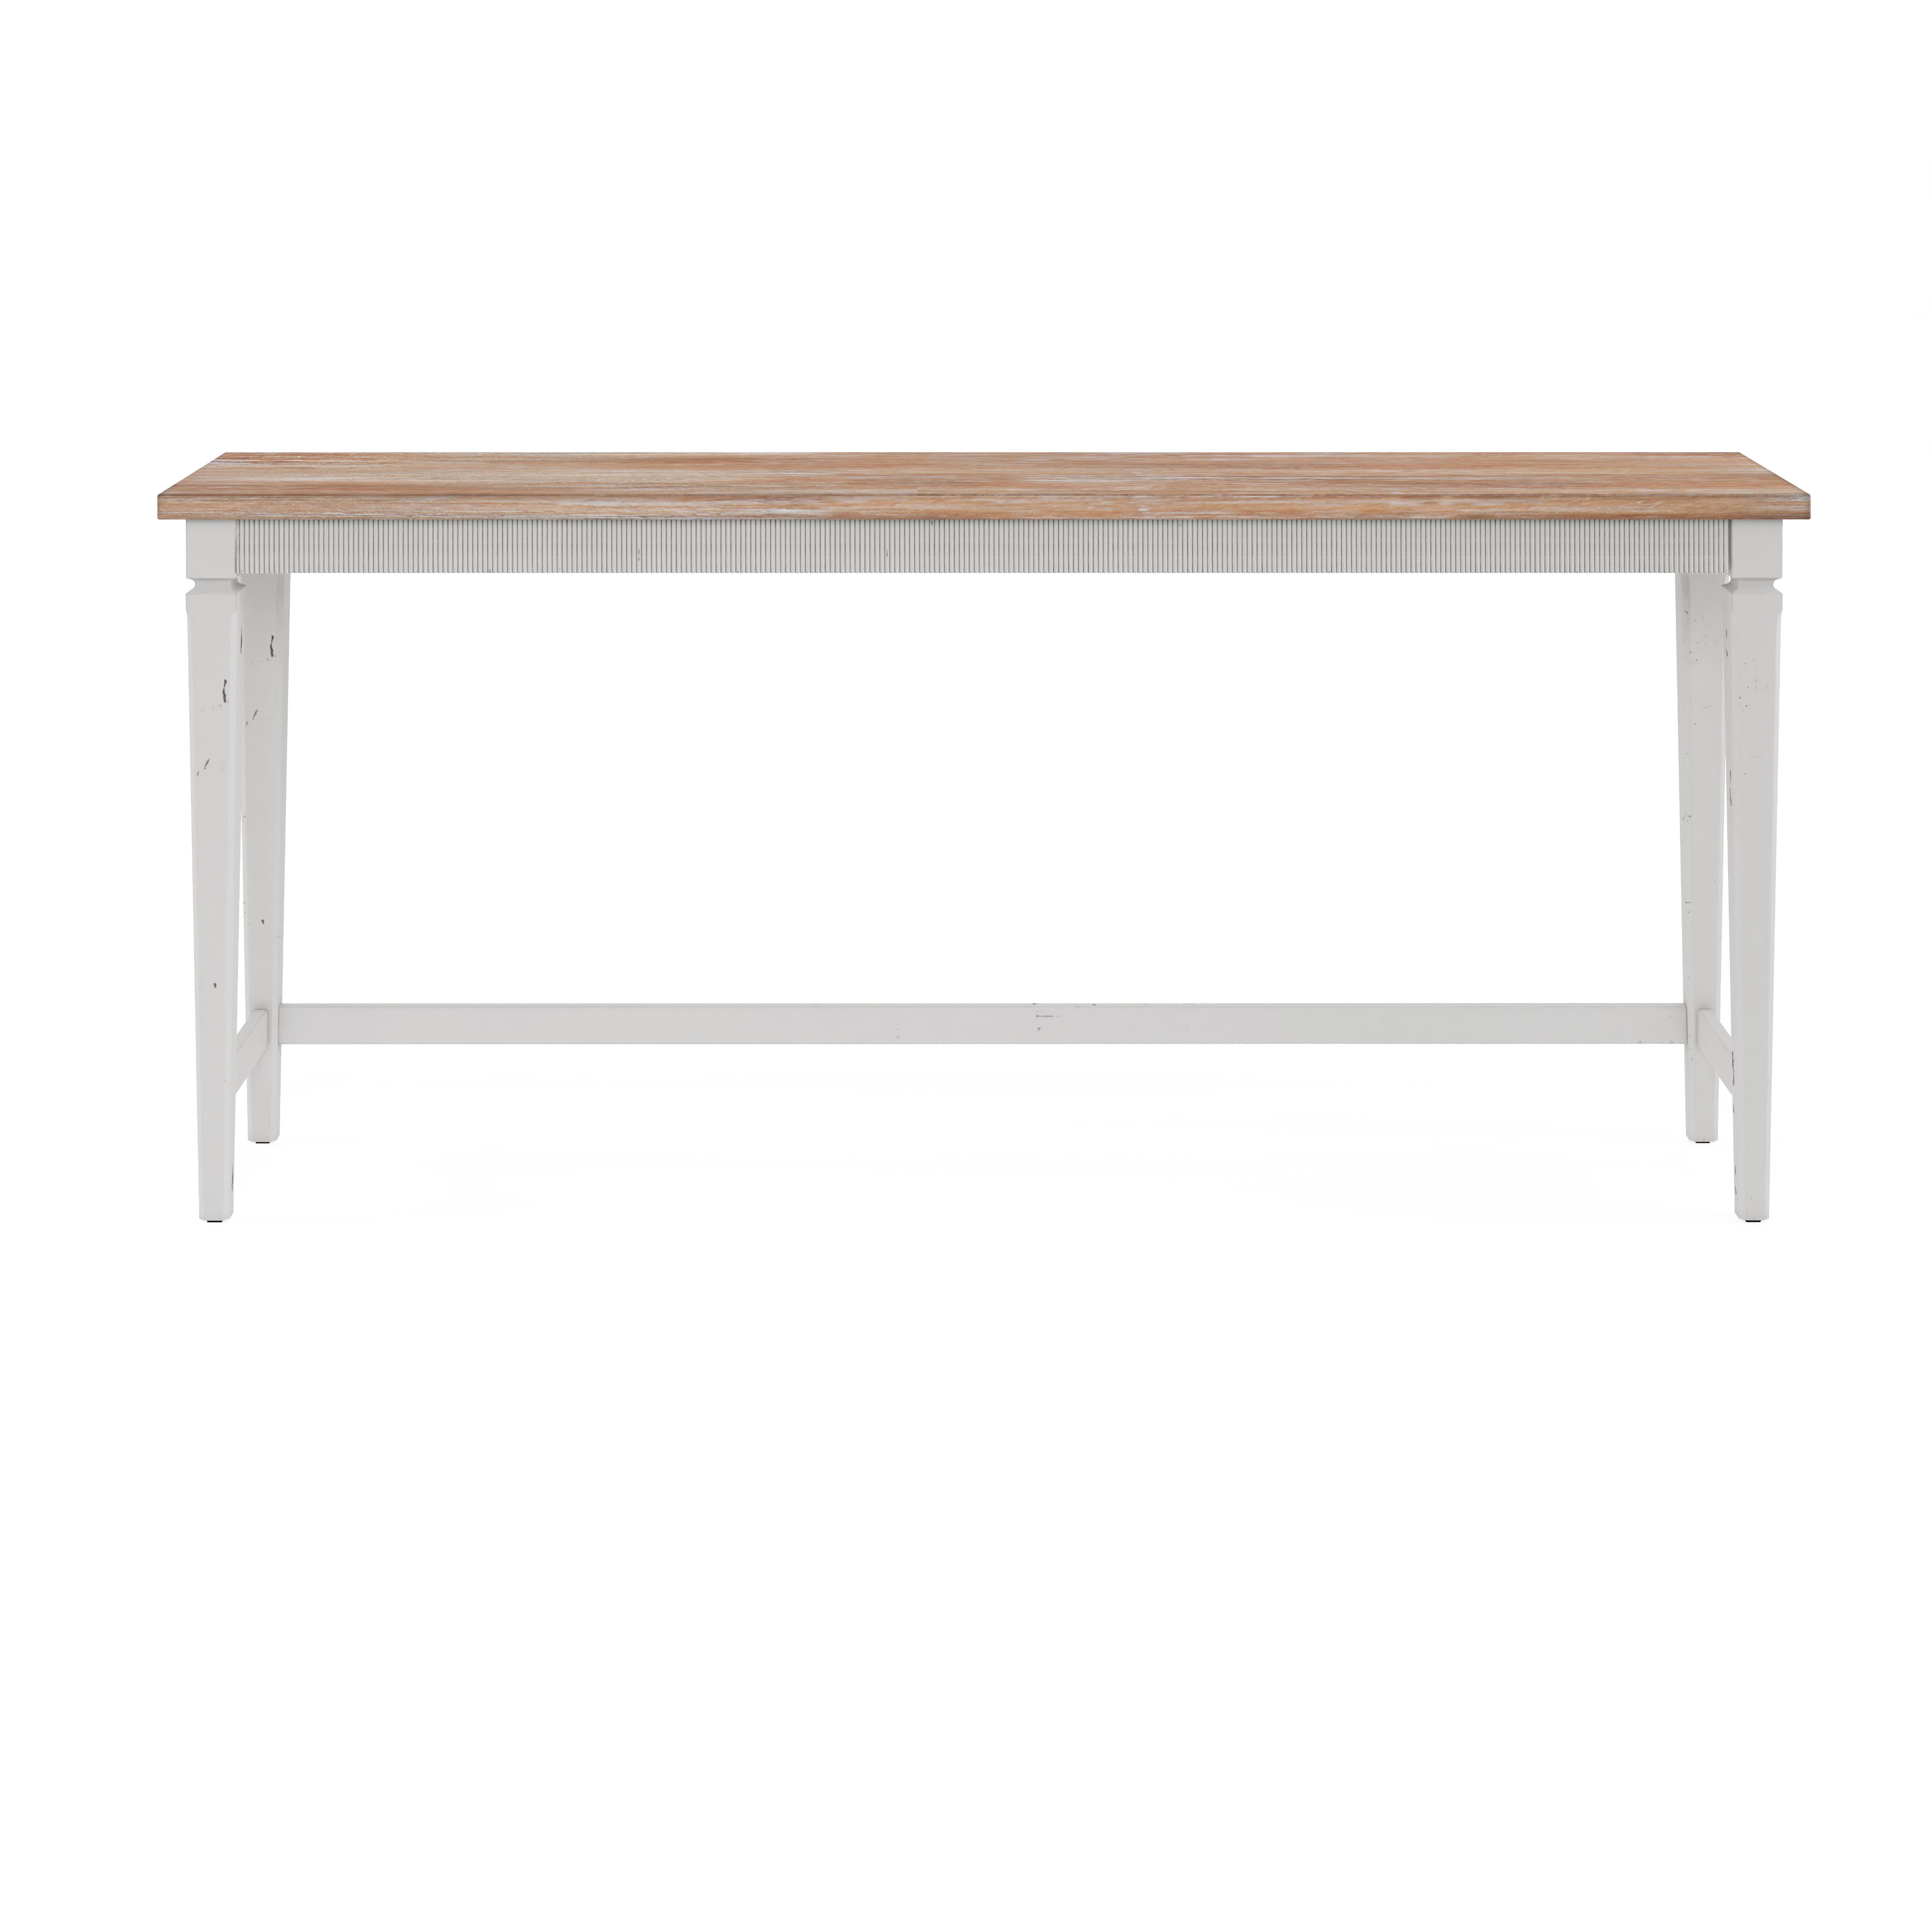 Urban, Farmhouse Gathering Table Palisade 273317-2908 in Light Brown, Beige 